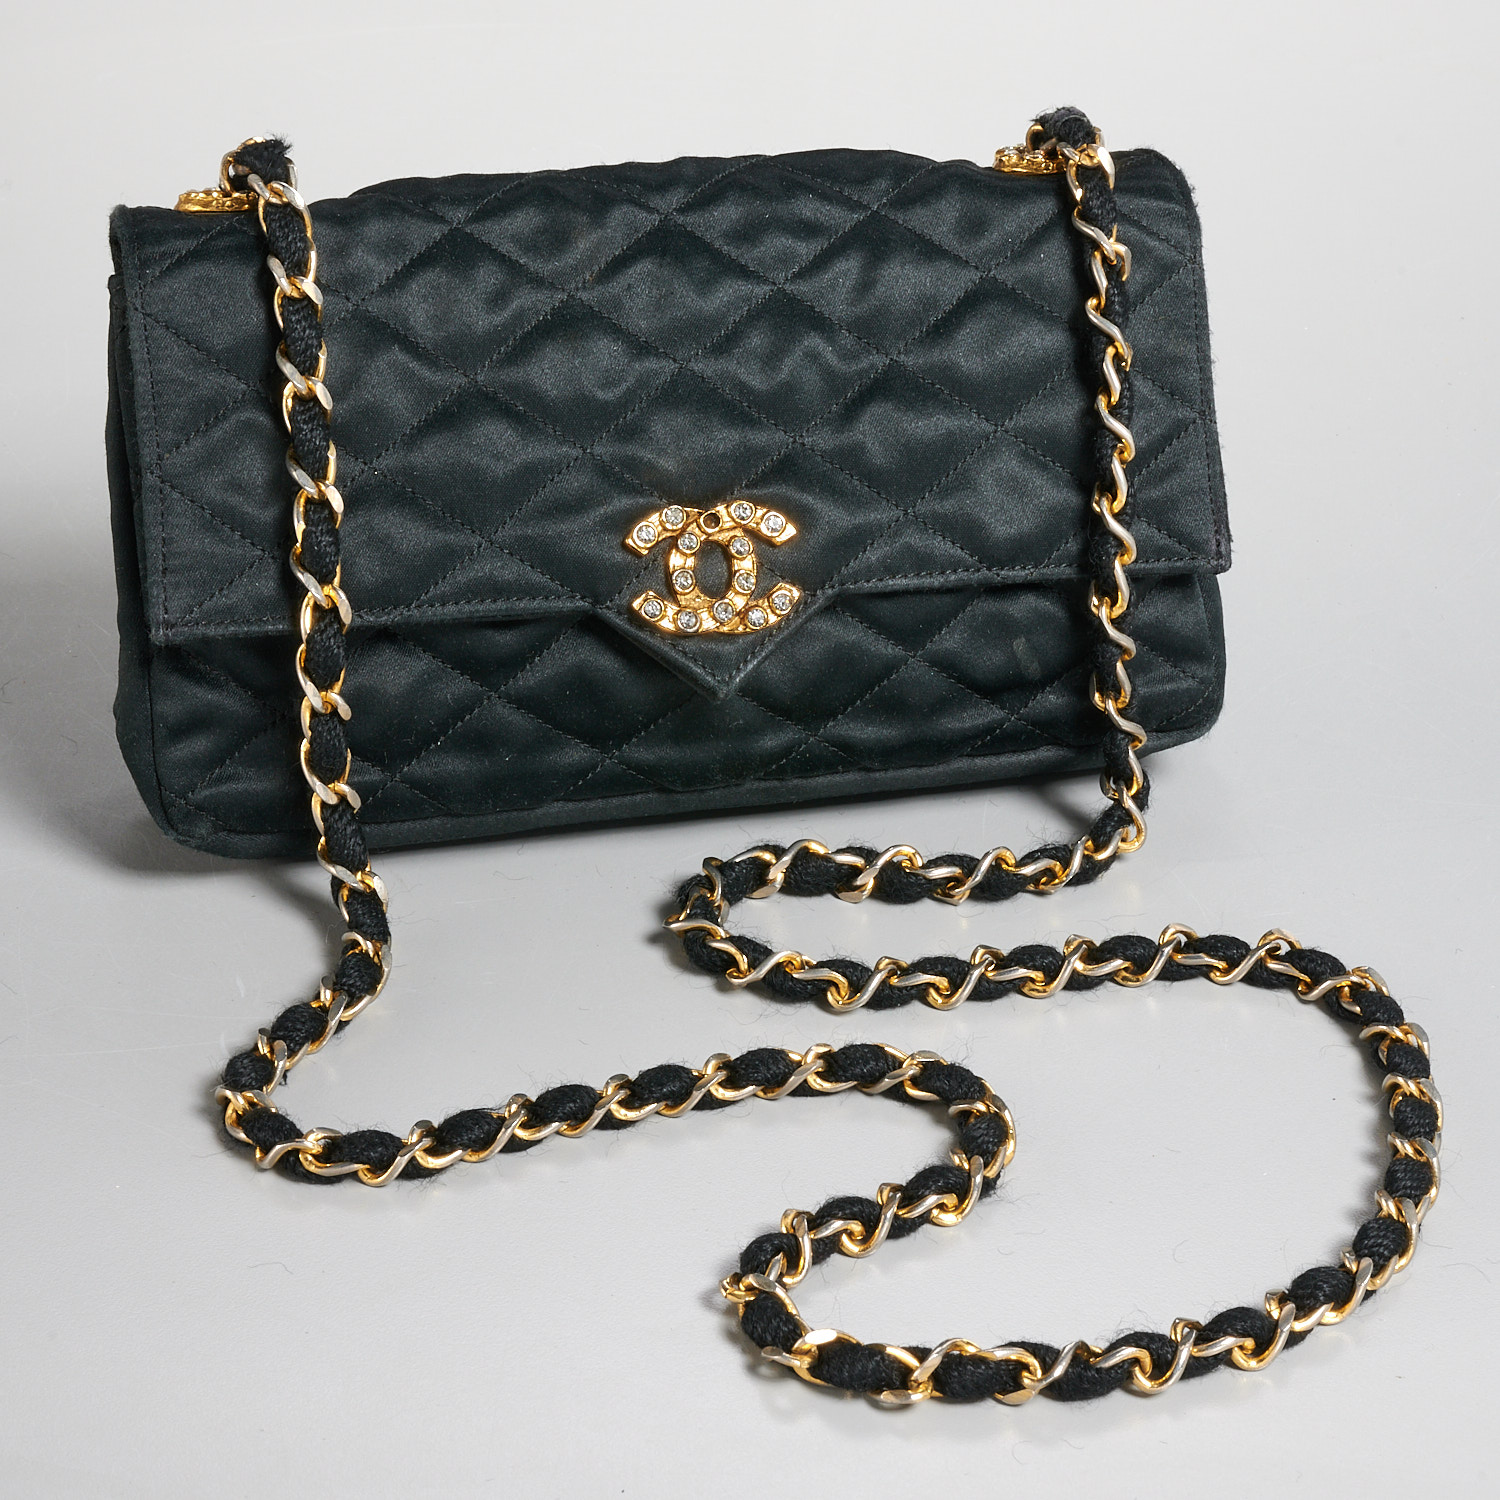 Chanel Chanel Black Quilted Leather Tiny Charm Bag Gold Chain CC